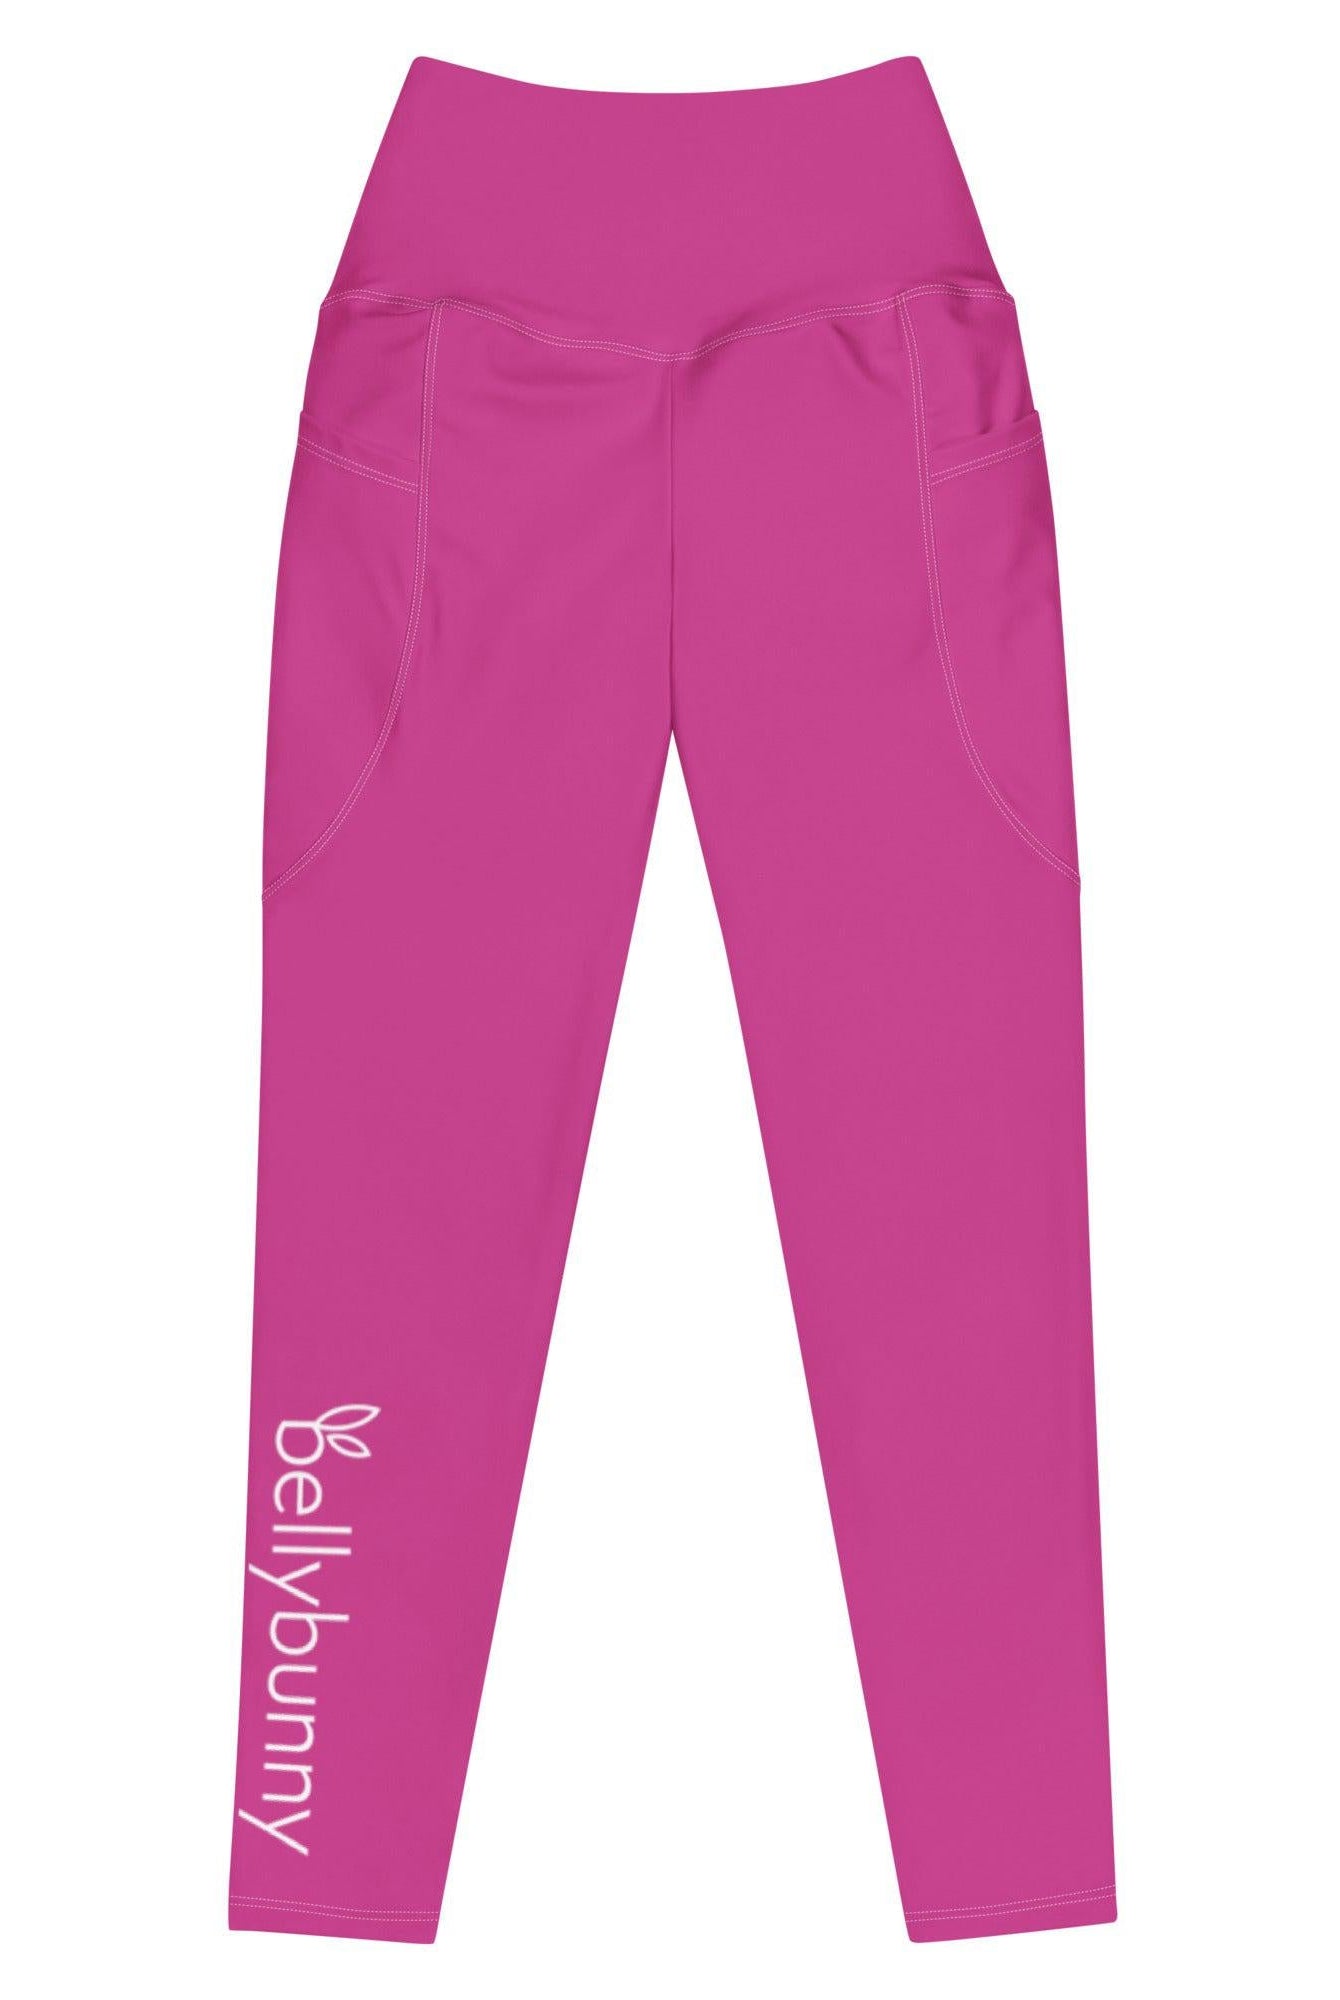 Bellybunny-Women's Classic Leggings-Pink with White Logo